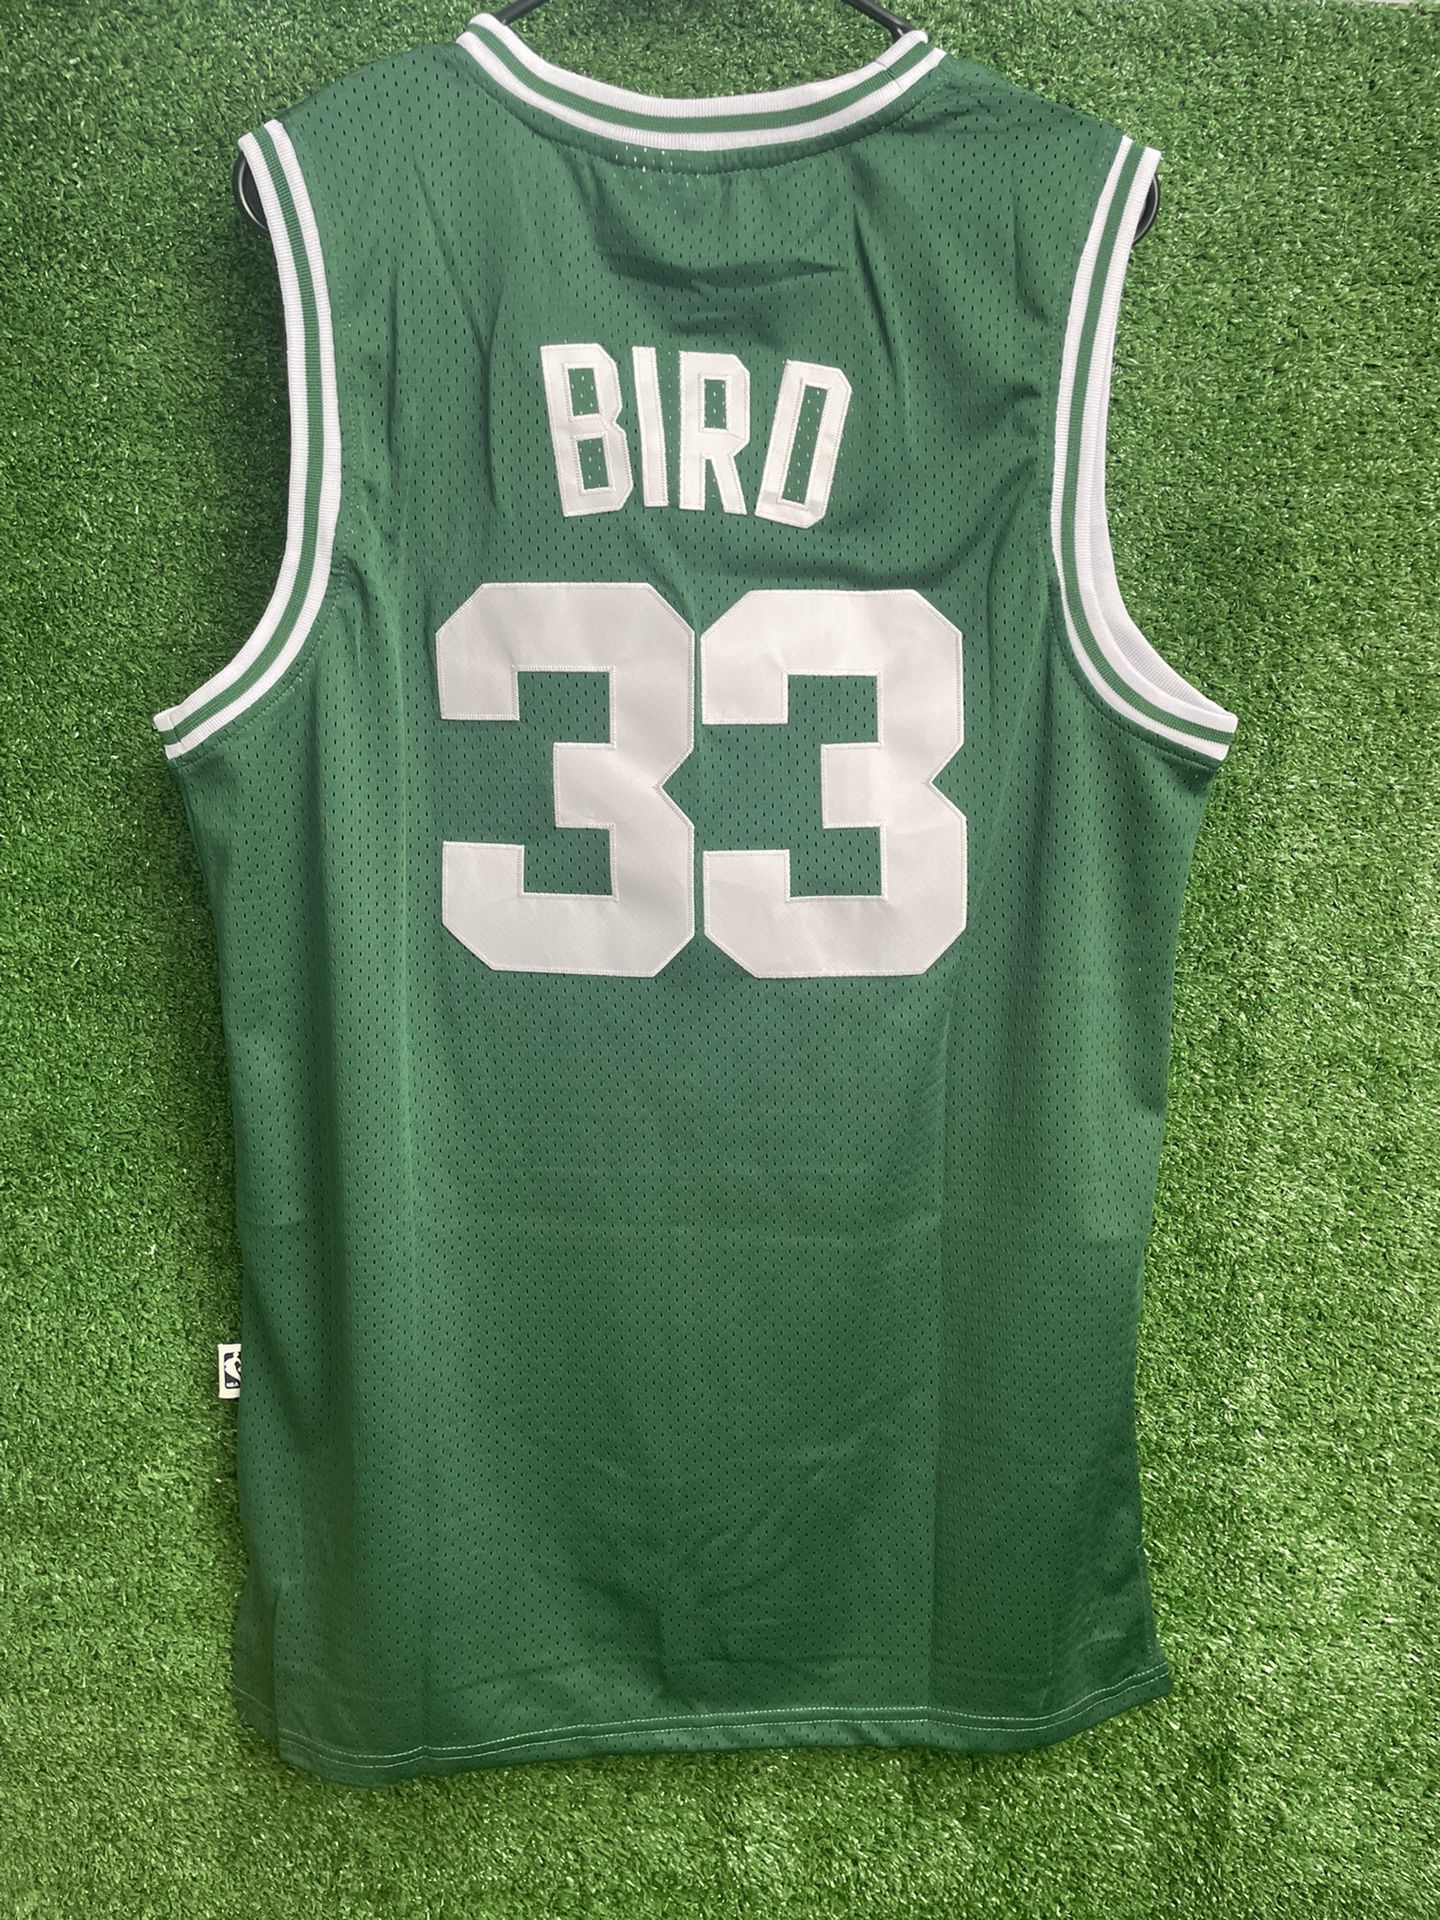 Youth Xl Boston Celtics Larry Bird Jersey for Sale in New York, NY - OfferUp